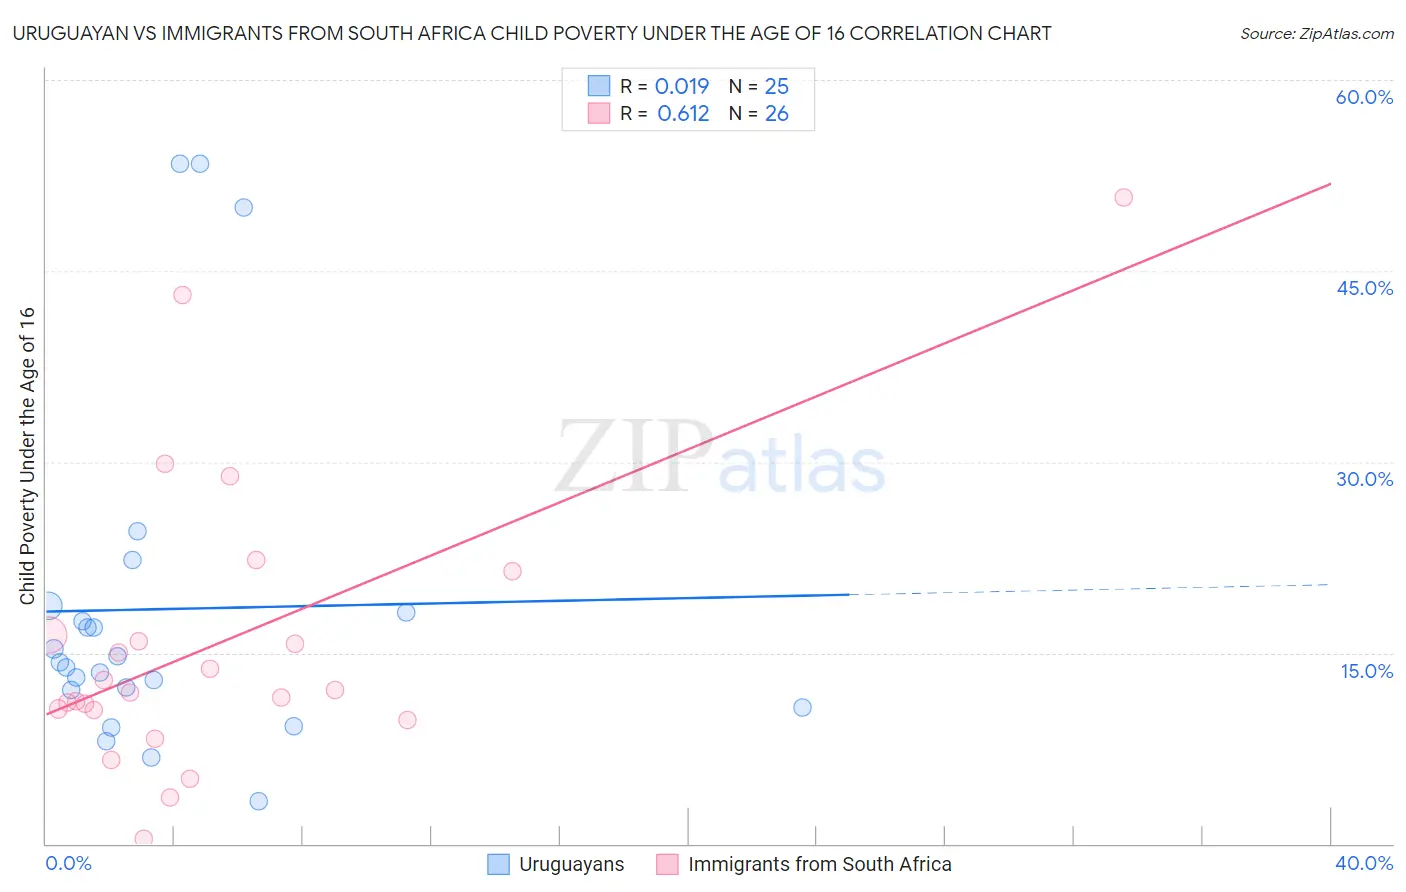 Uruguayan vs Immigrants from South Africa Child Poverty Under the Age of 16